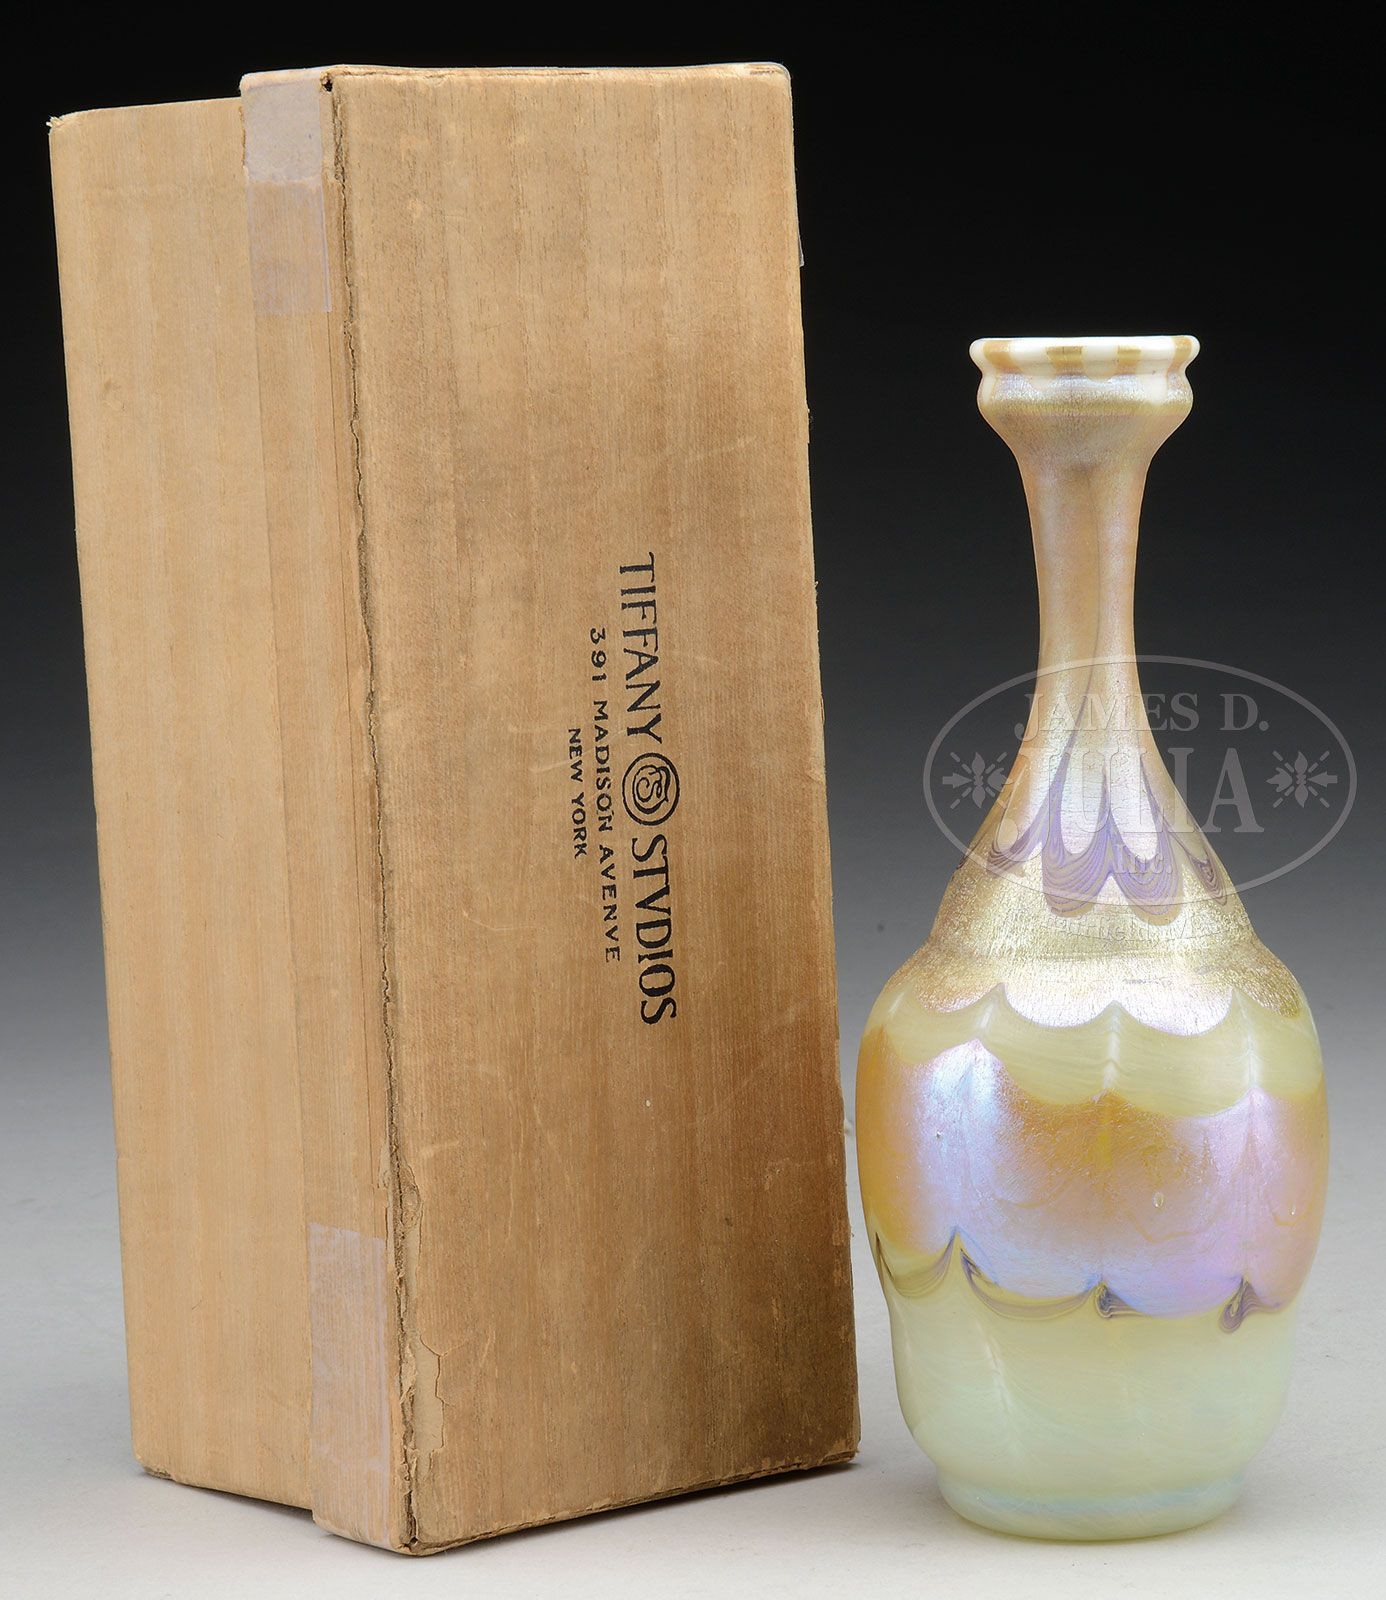 22 Fantastic Glass Vase with Gold Bottom 2024 free download glass vase with gold bottom of tiffany favrile glass decorated vase tiffany favrile vase has inside tiffany favrile vase has opaque cream colored glass body shading to opaque white at the to